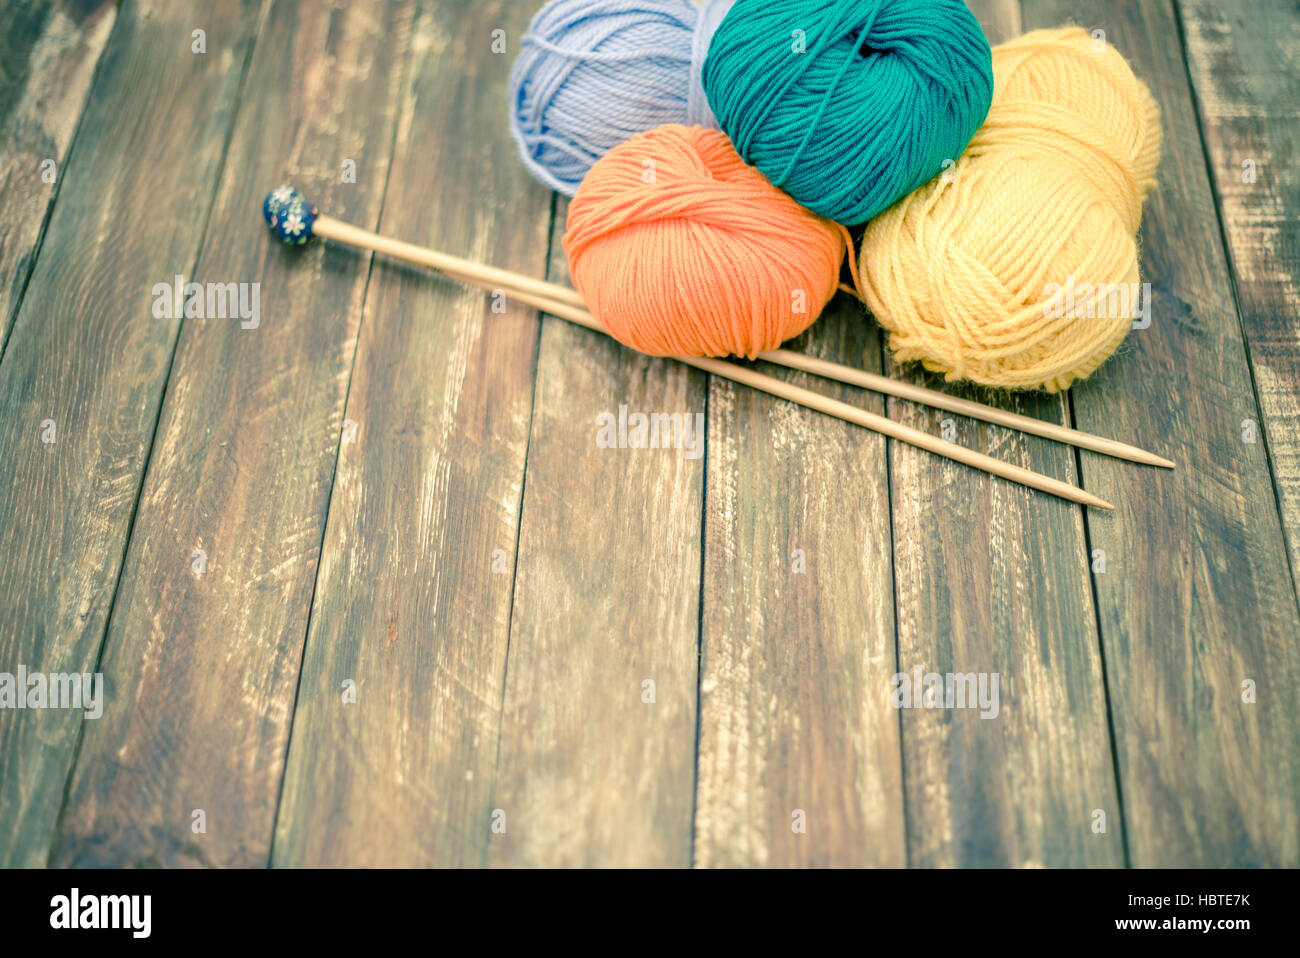 Yarn With Knitting Needles On Wooden Background Stock Photo